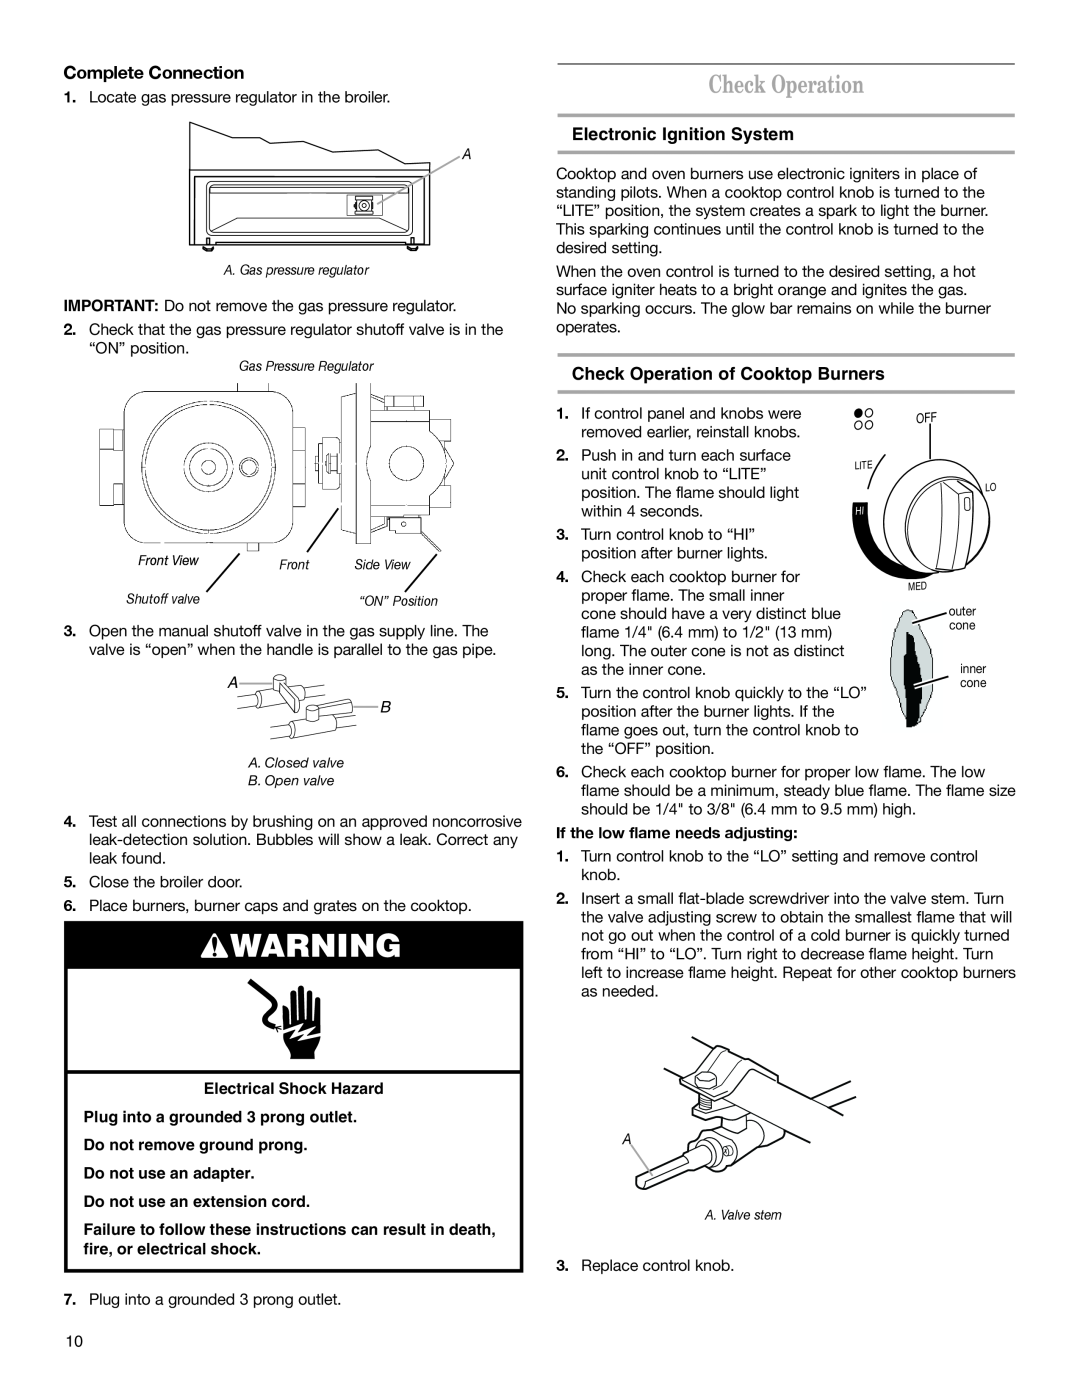 Whirlpool W10153329A Complete Connection, Electronic Ignition System, Check Operation of Cooktop Burners 